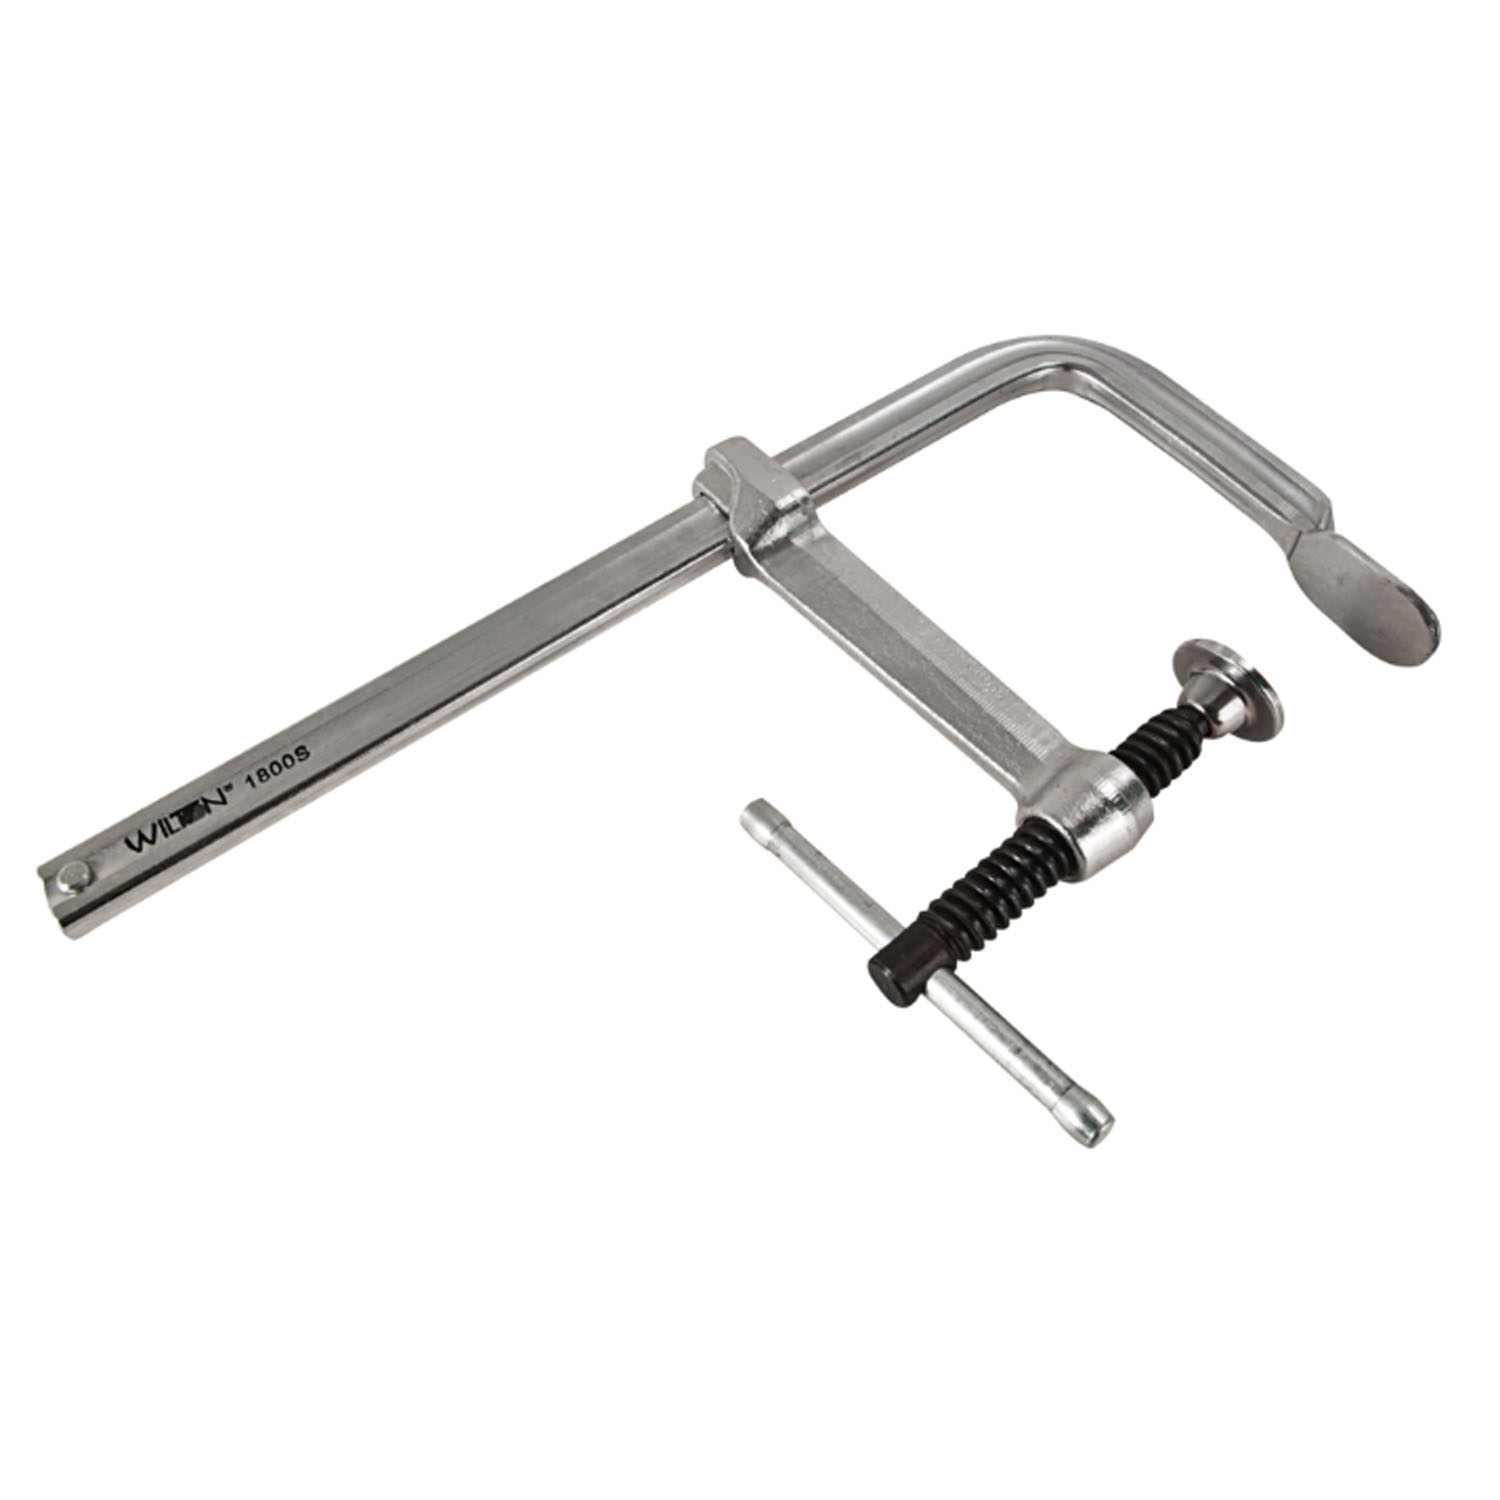 REGULAR DUTY F-CLAMP 1800S (MULTIPLE SIZES AVAILABLE)